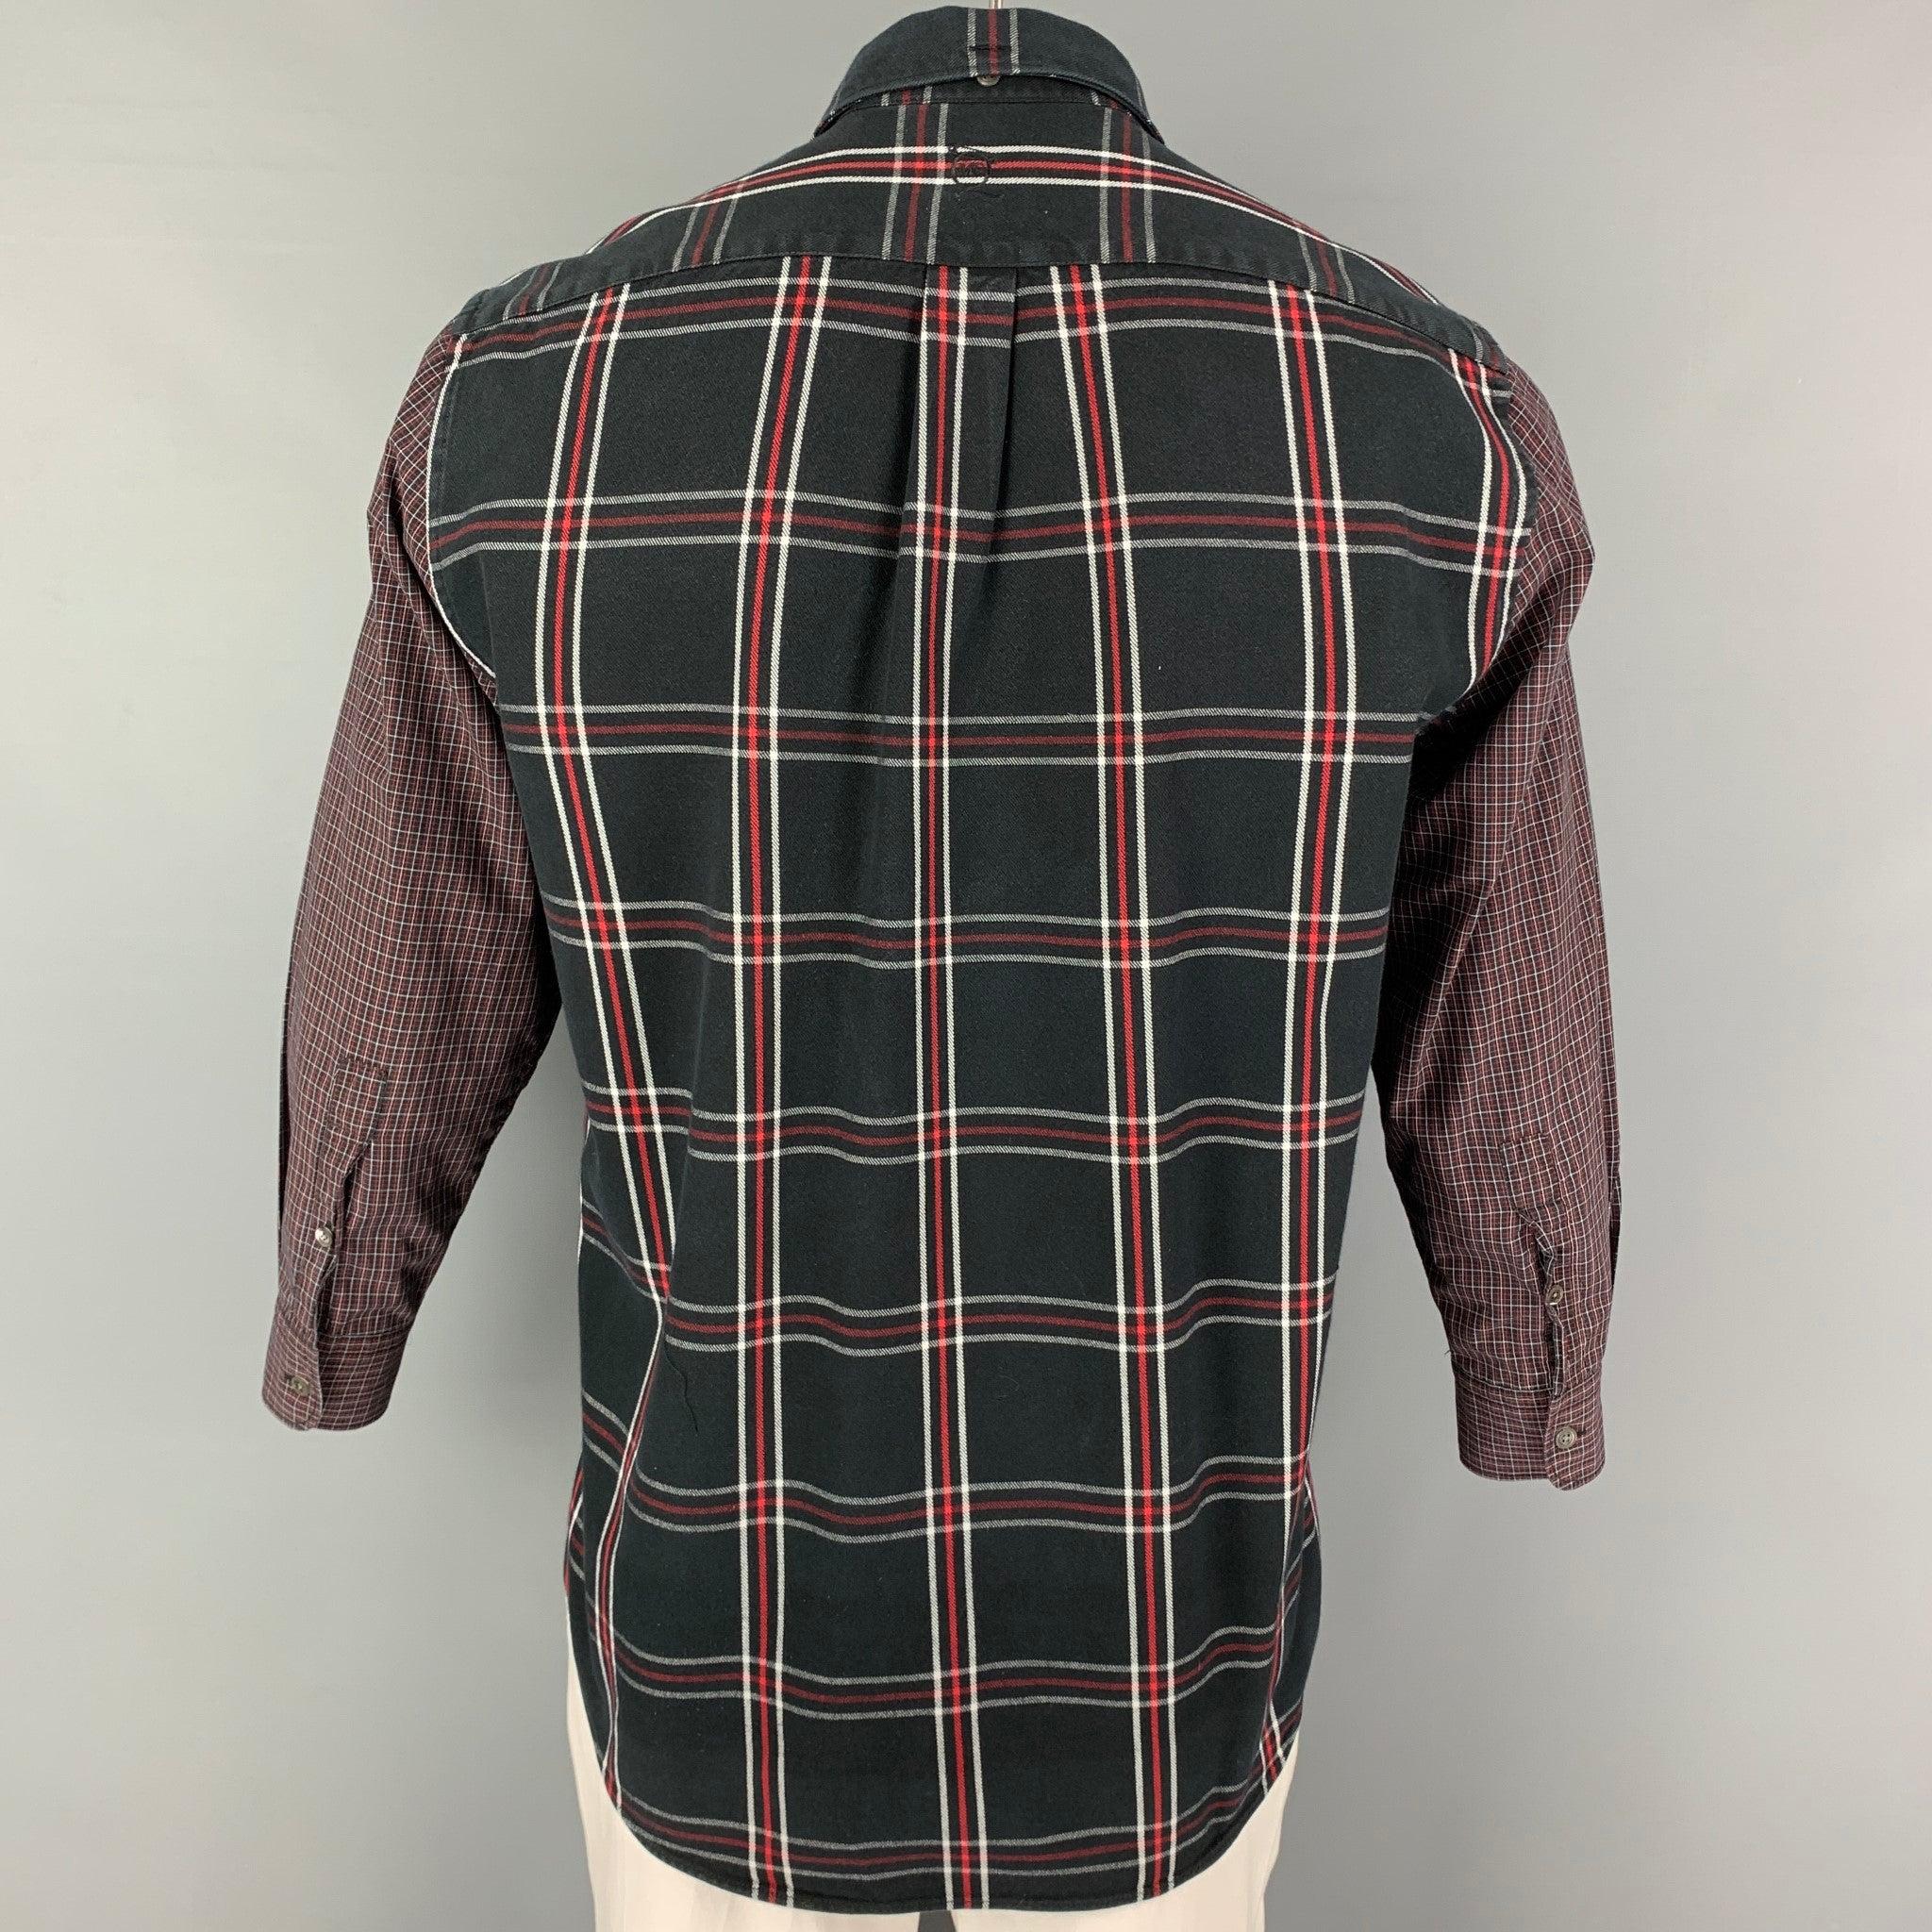 ALEXANDER MCQUEEN Size M Black Red Plaid Cotton Button Up Long Sleeve Shirt In Good Condition For Sale In San Francisco, CA